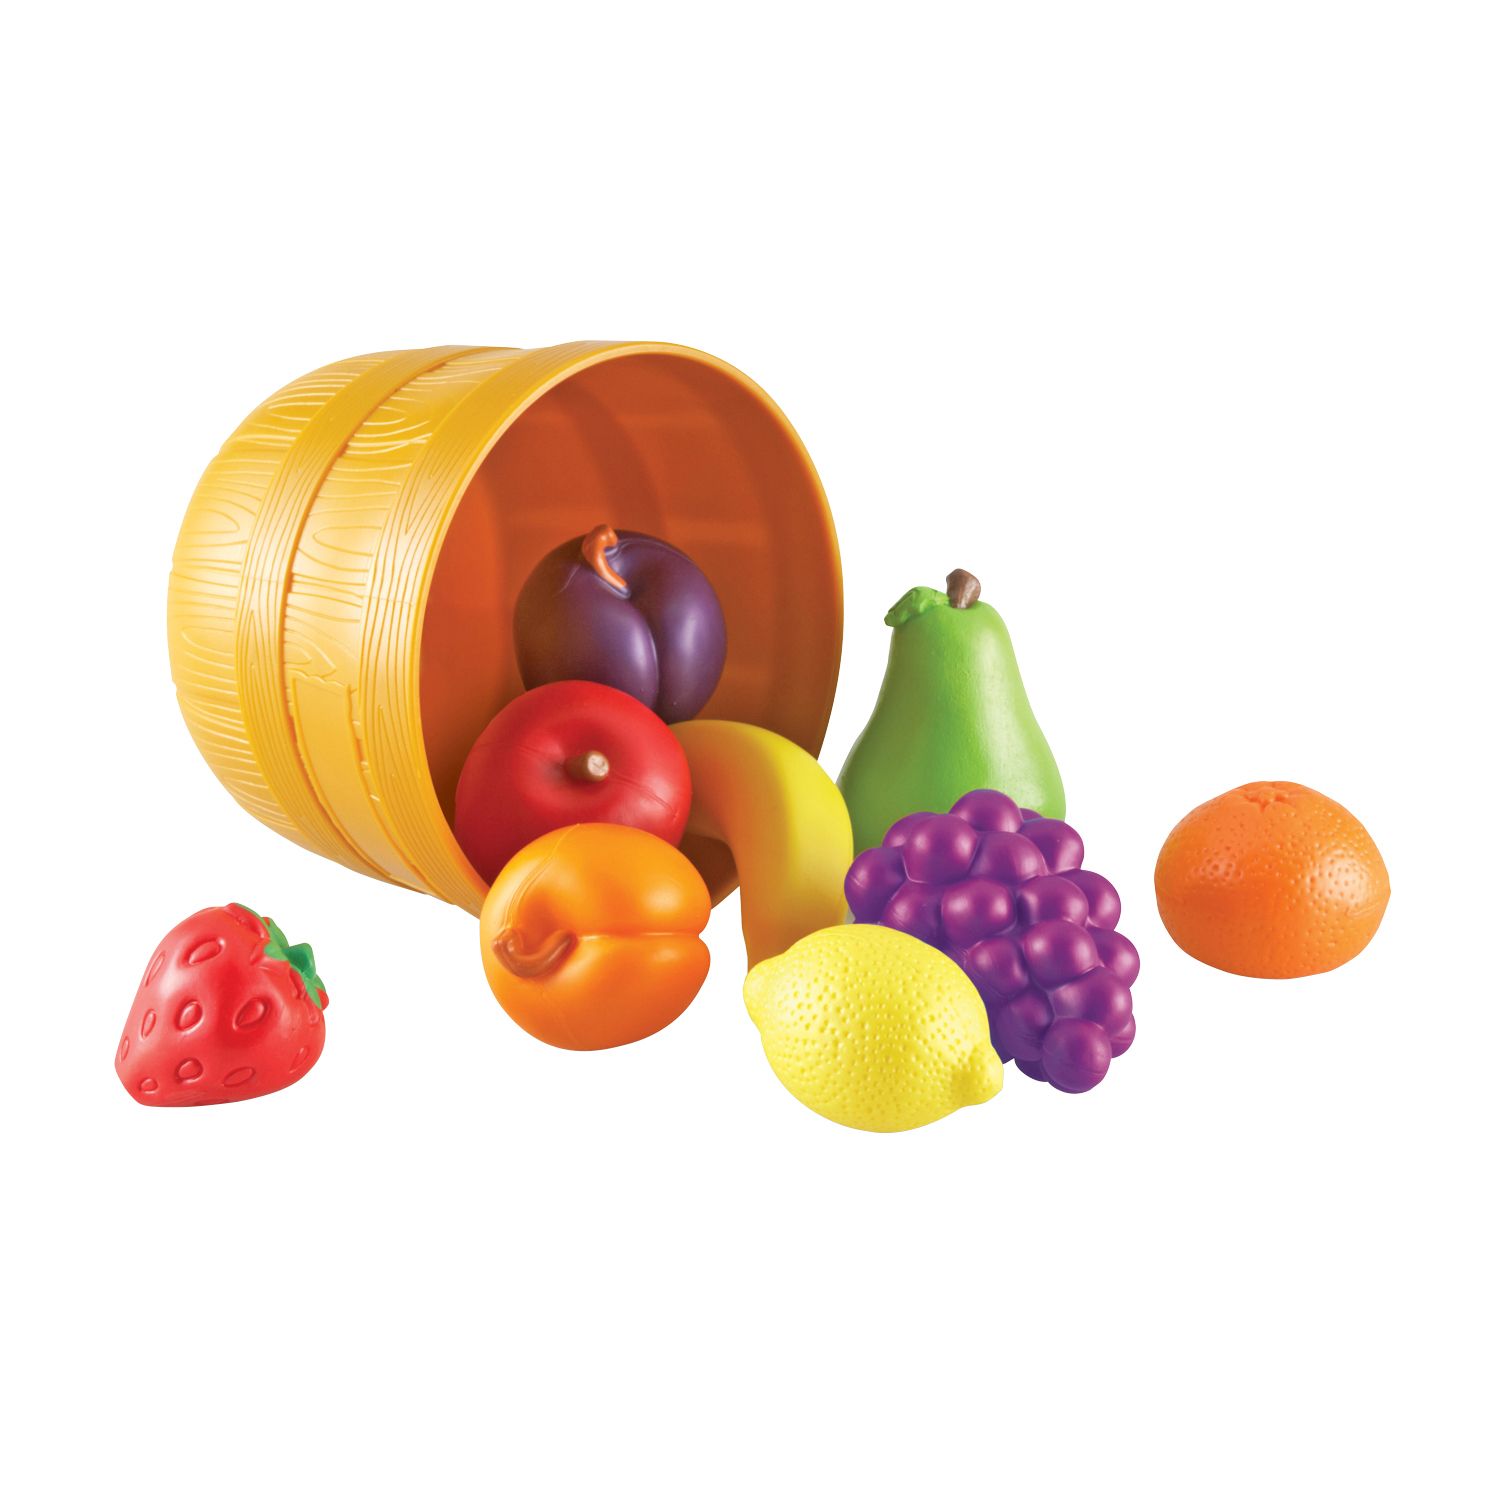 Image for Learning Resources New Sprouts Bushel of Fruit Set at Kohl's.